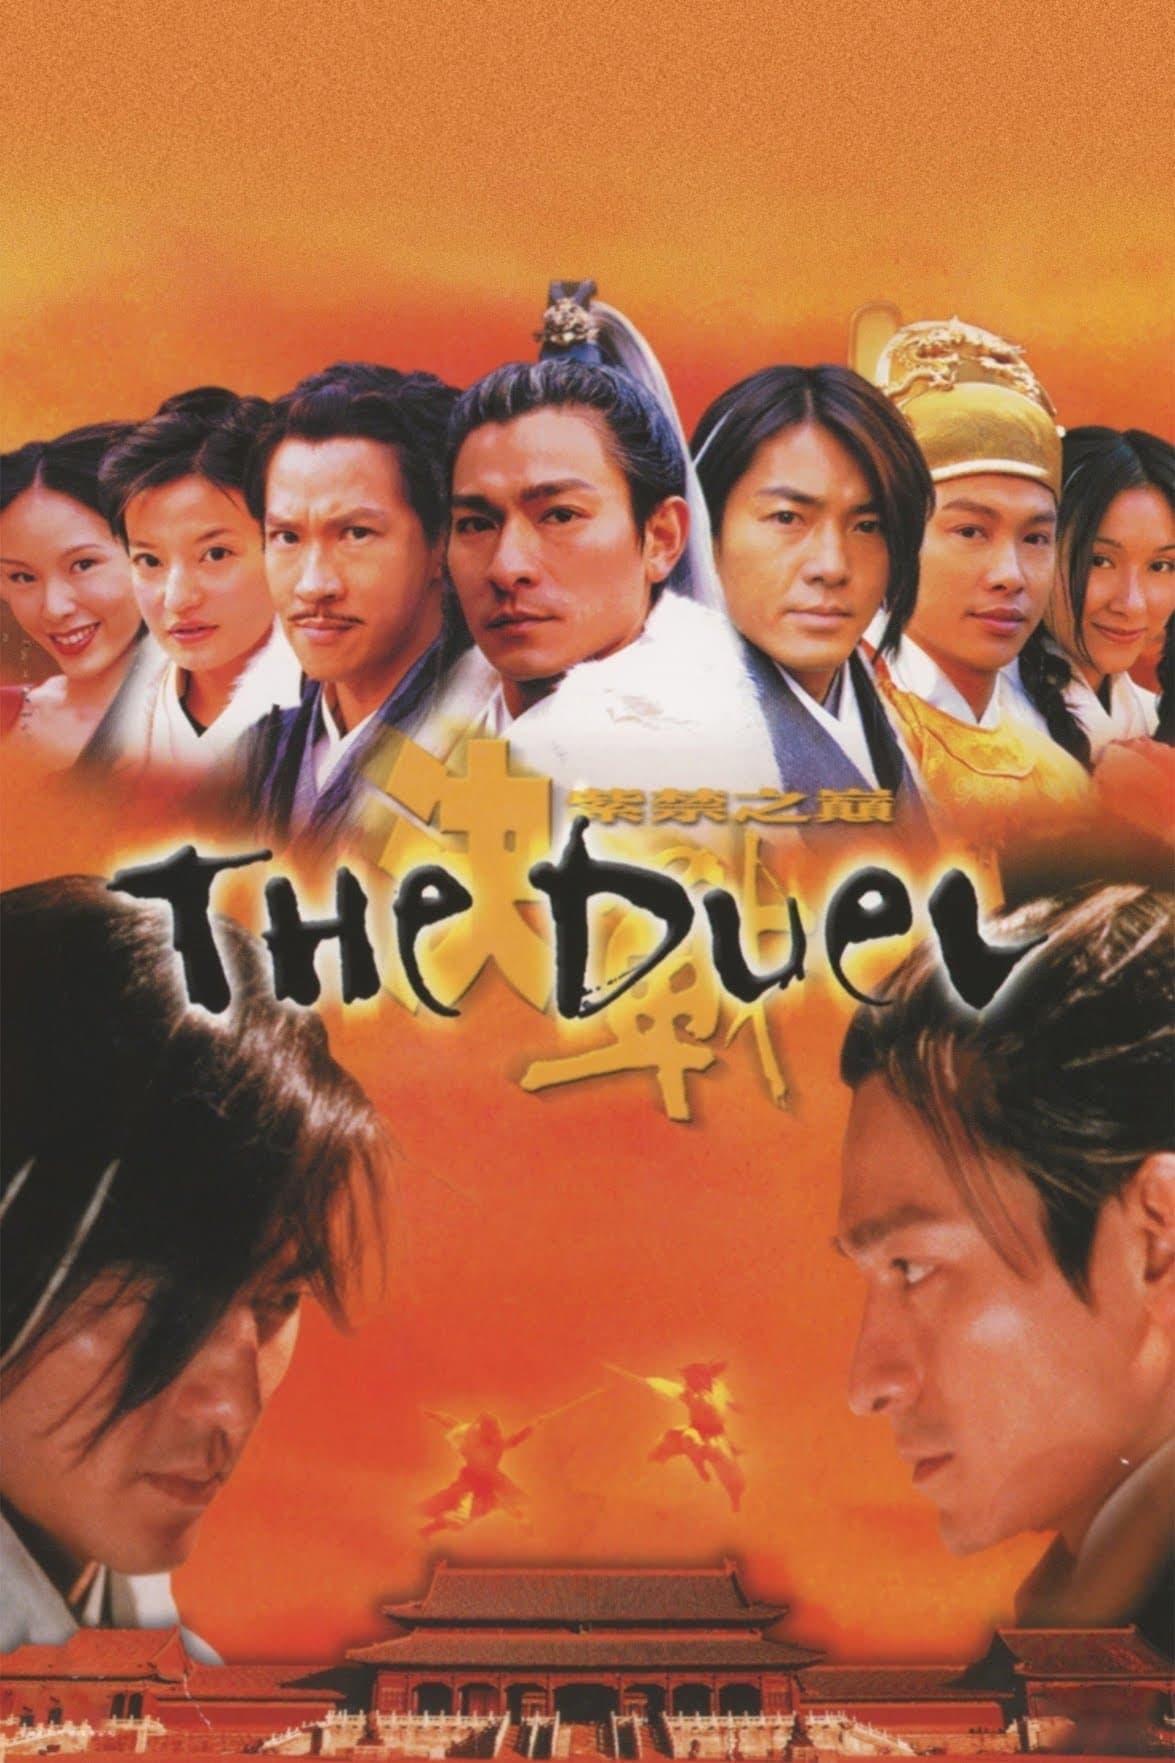 The Duel poster